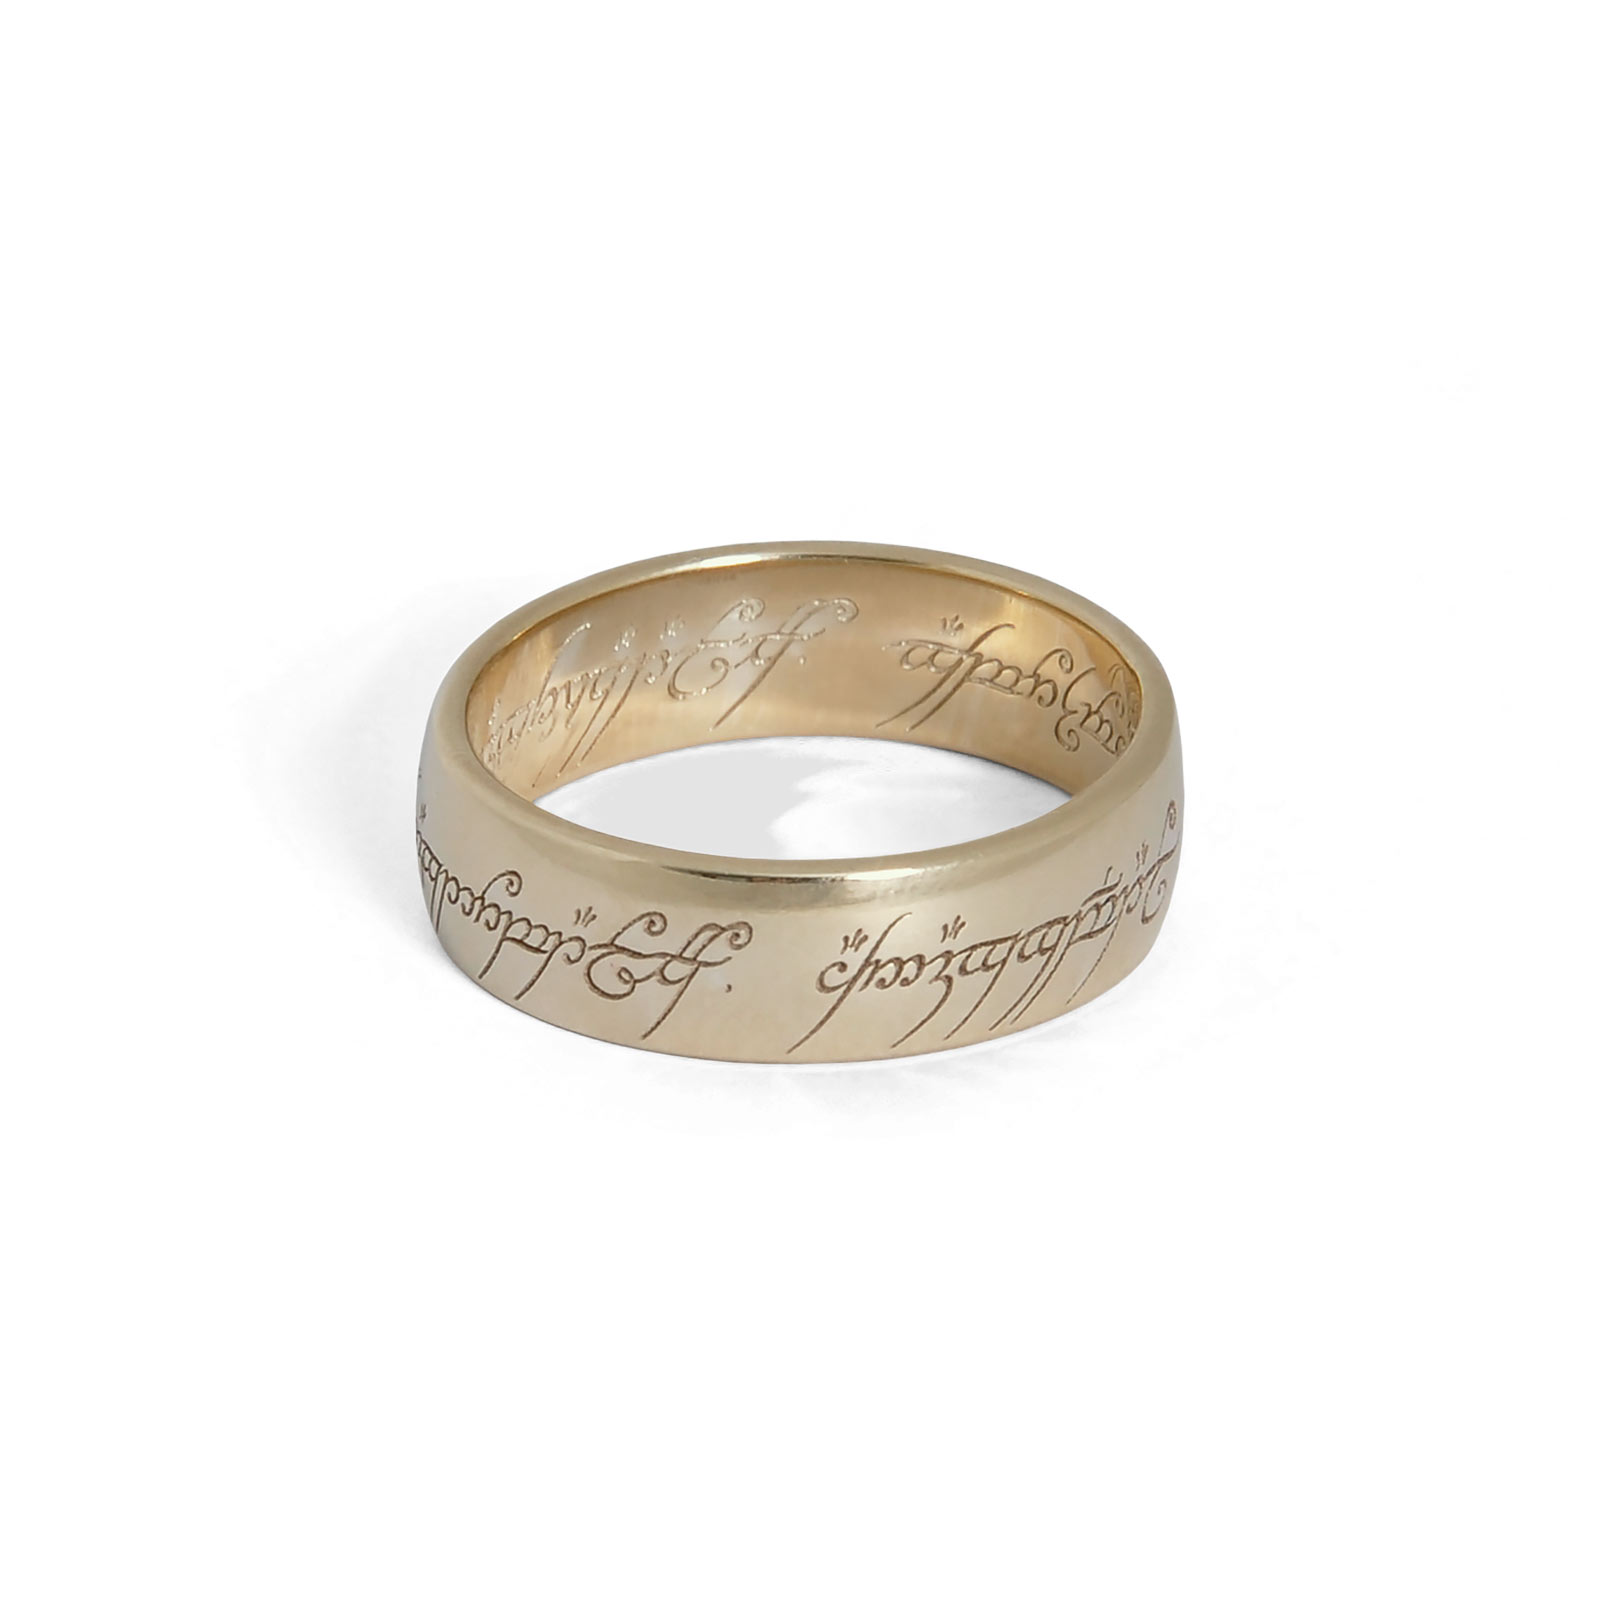 The Lord of the Rings - Ring Gold 8 Karat